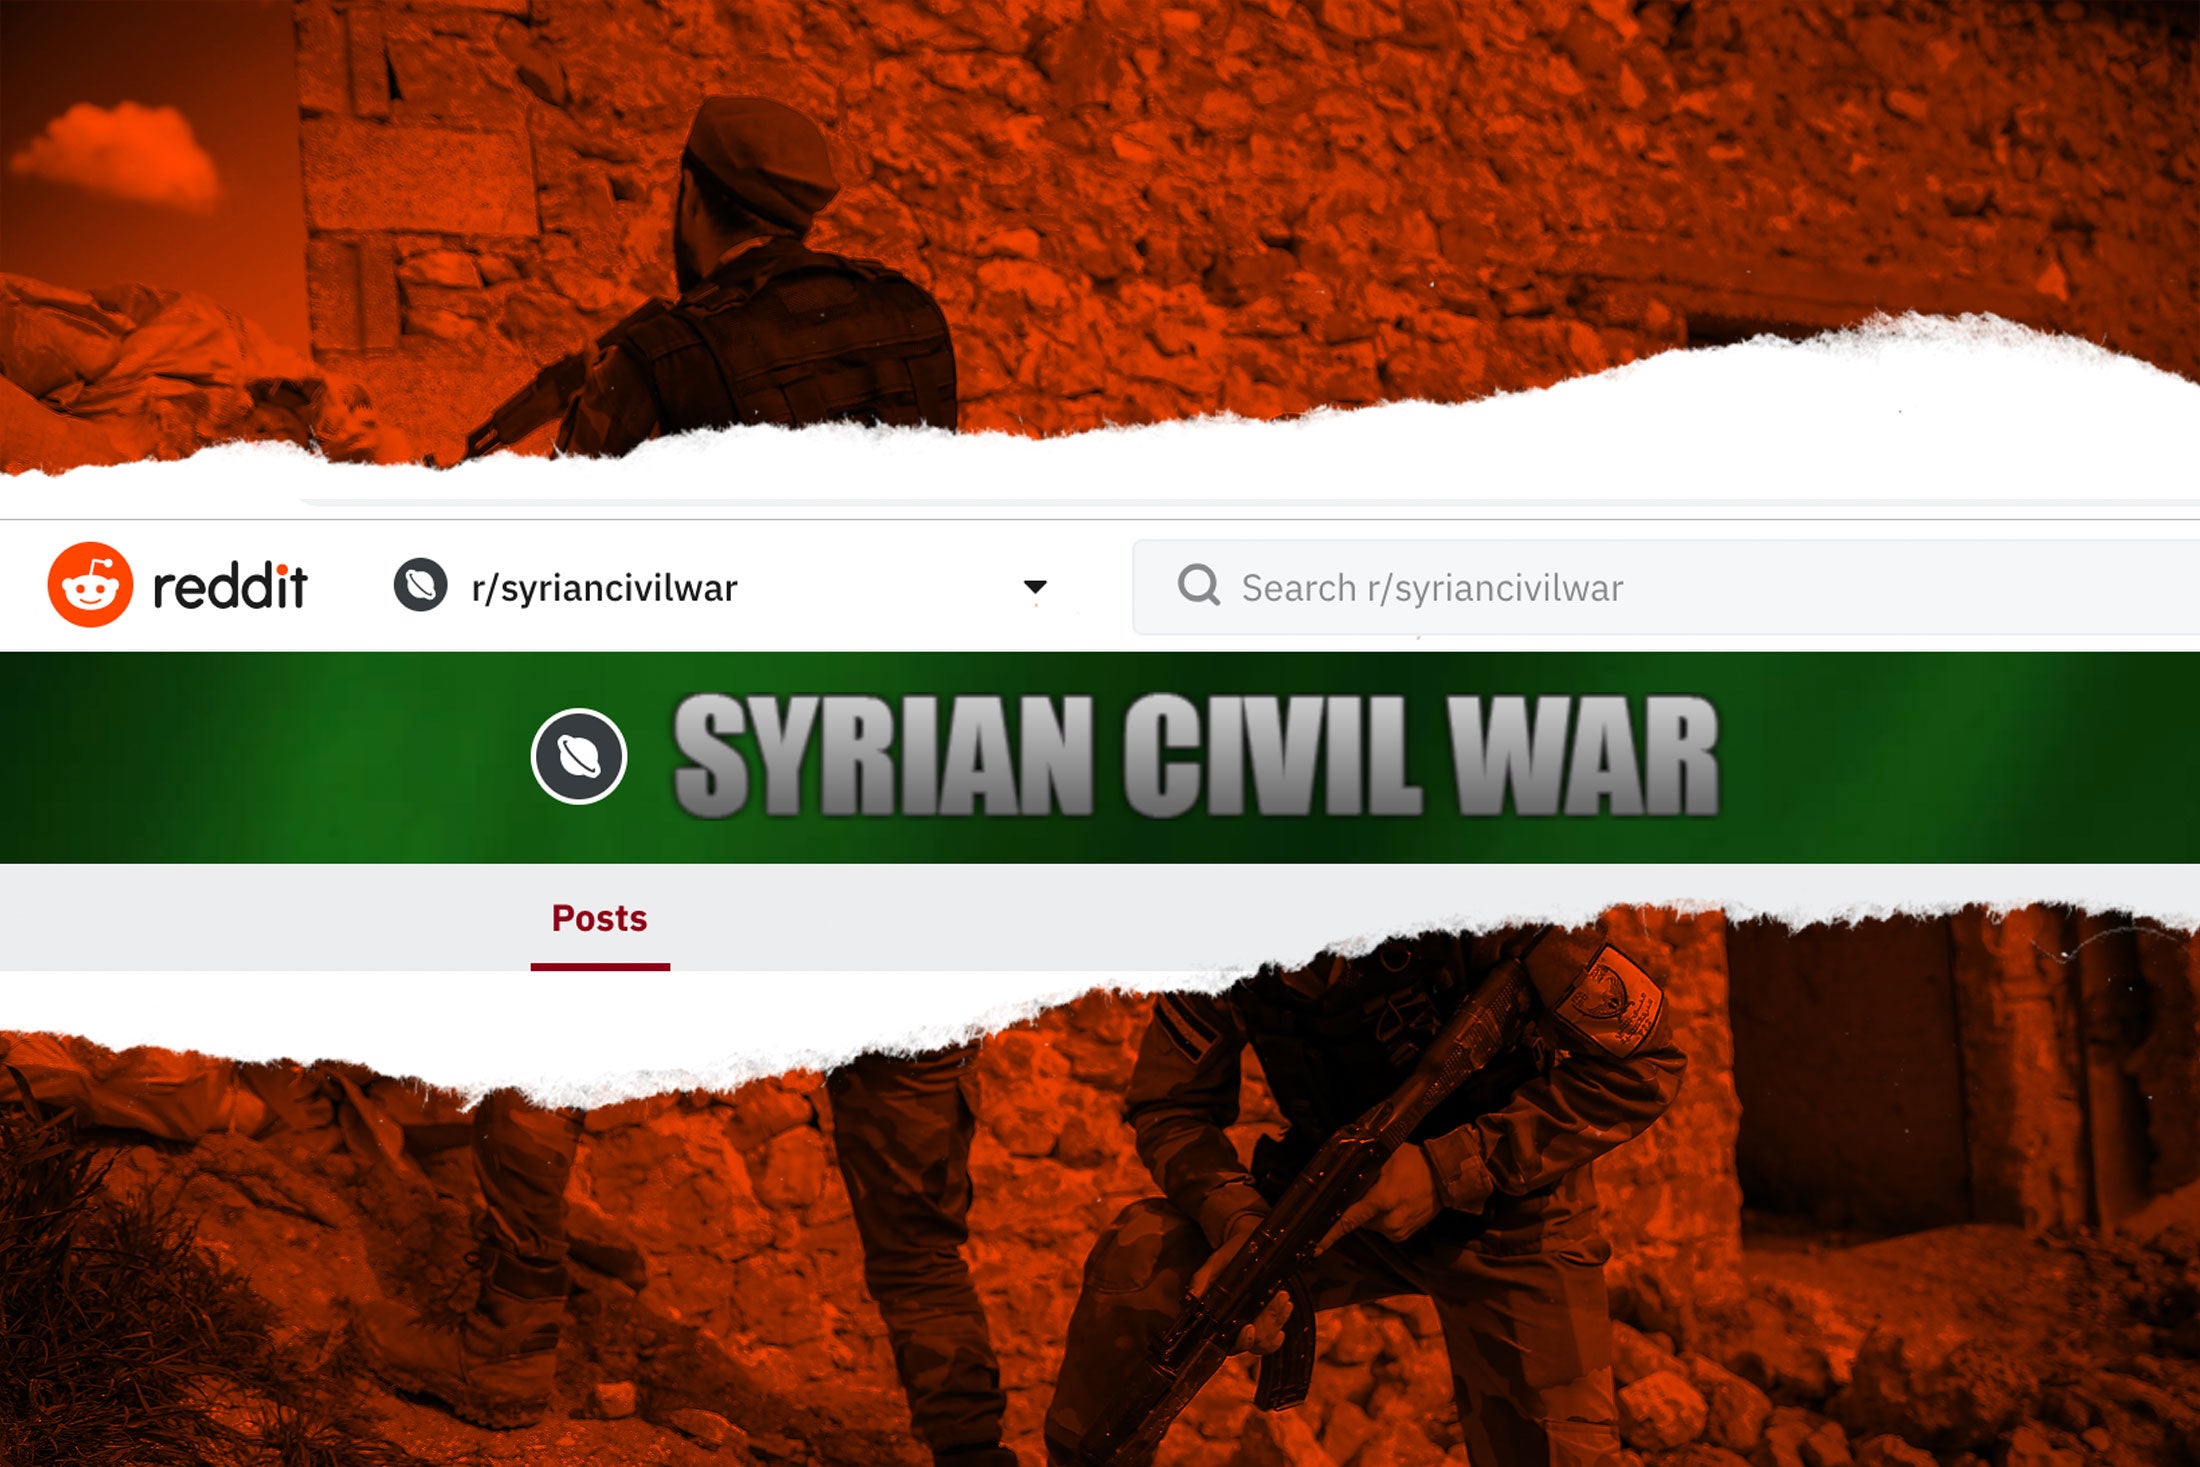 A screenshot of the r/syriancivilwar header over an image of Syrian fighters.